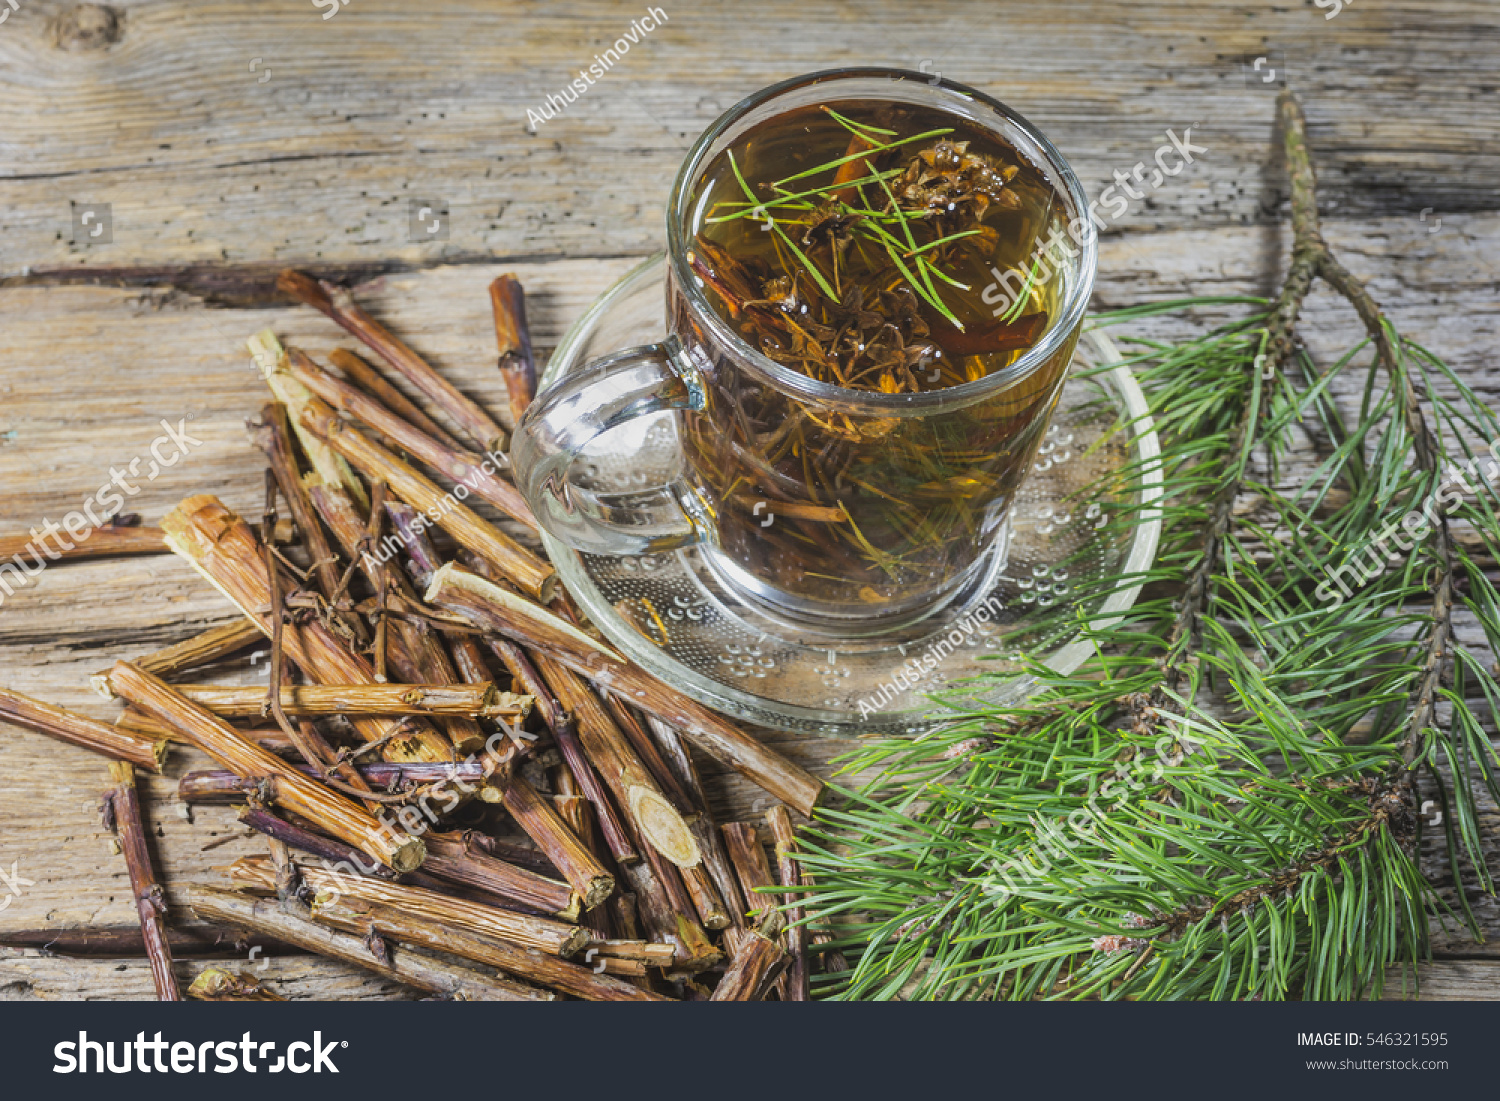 Useful tea from dry branches raspberries and pine needles #546321595